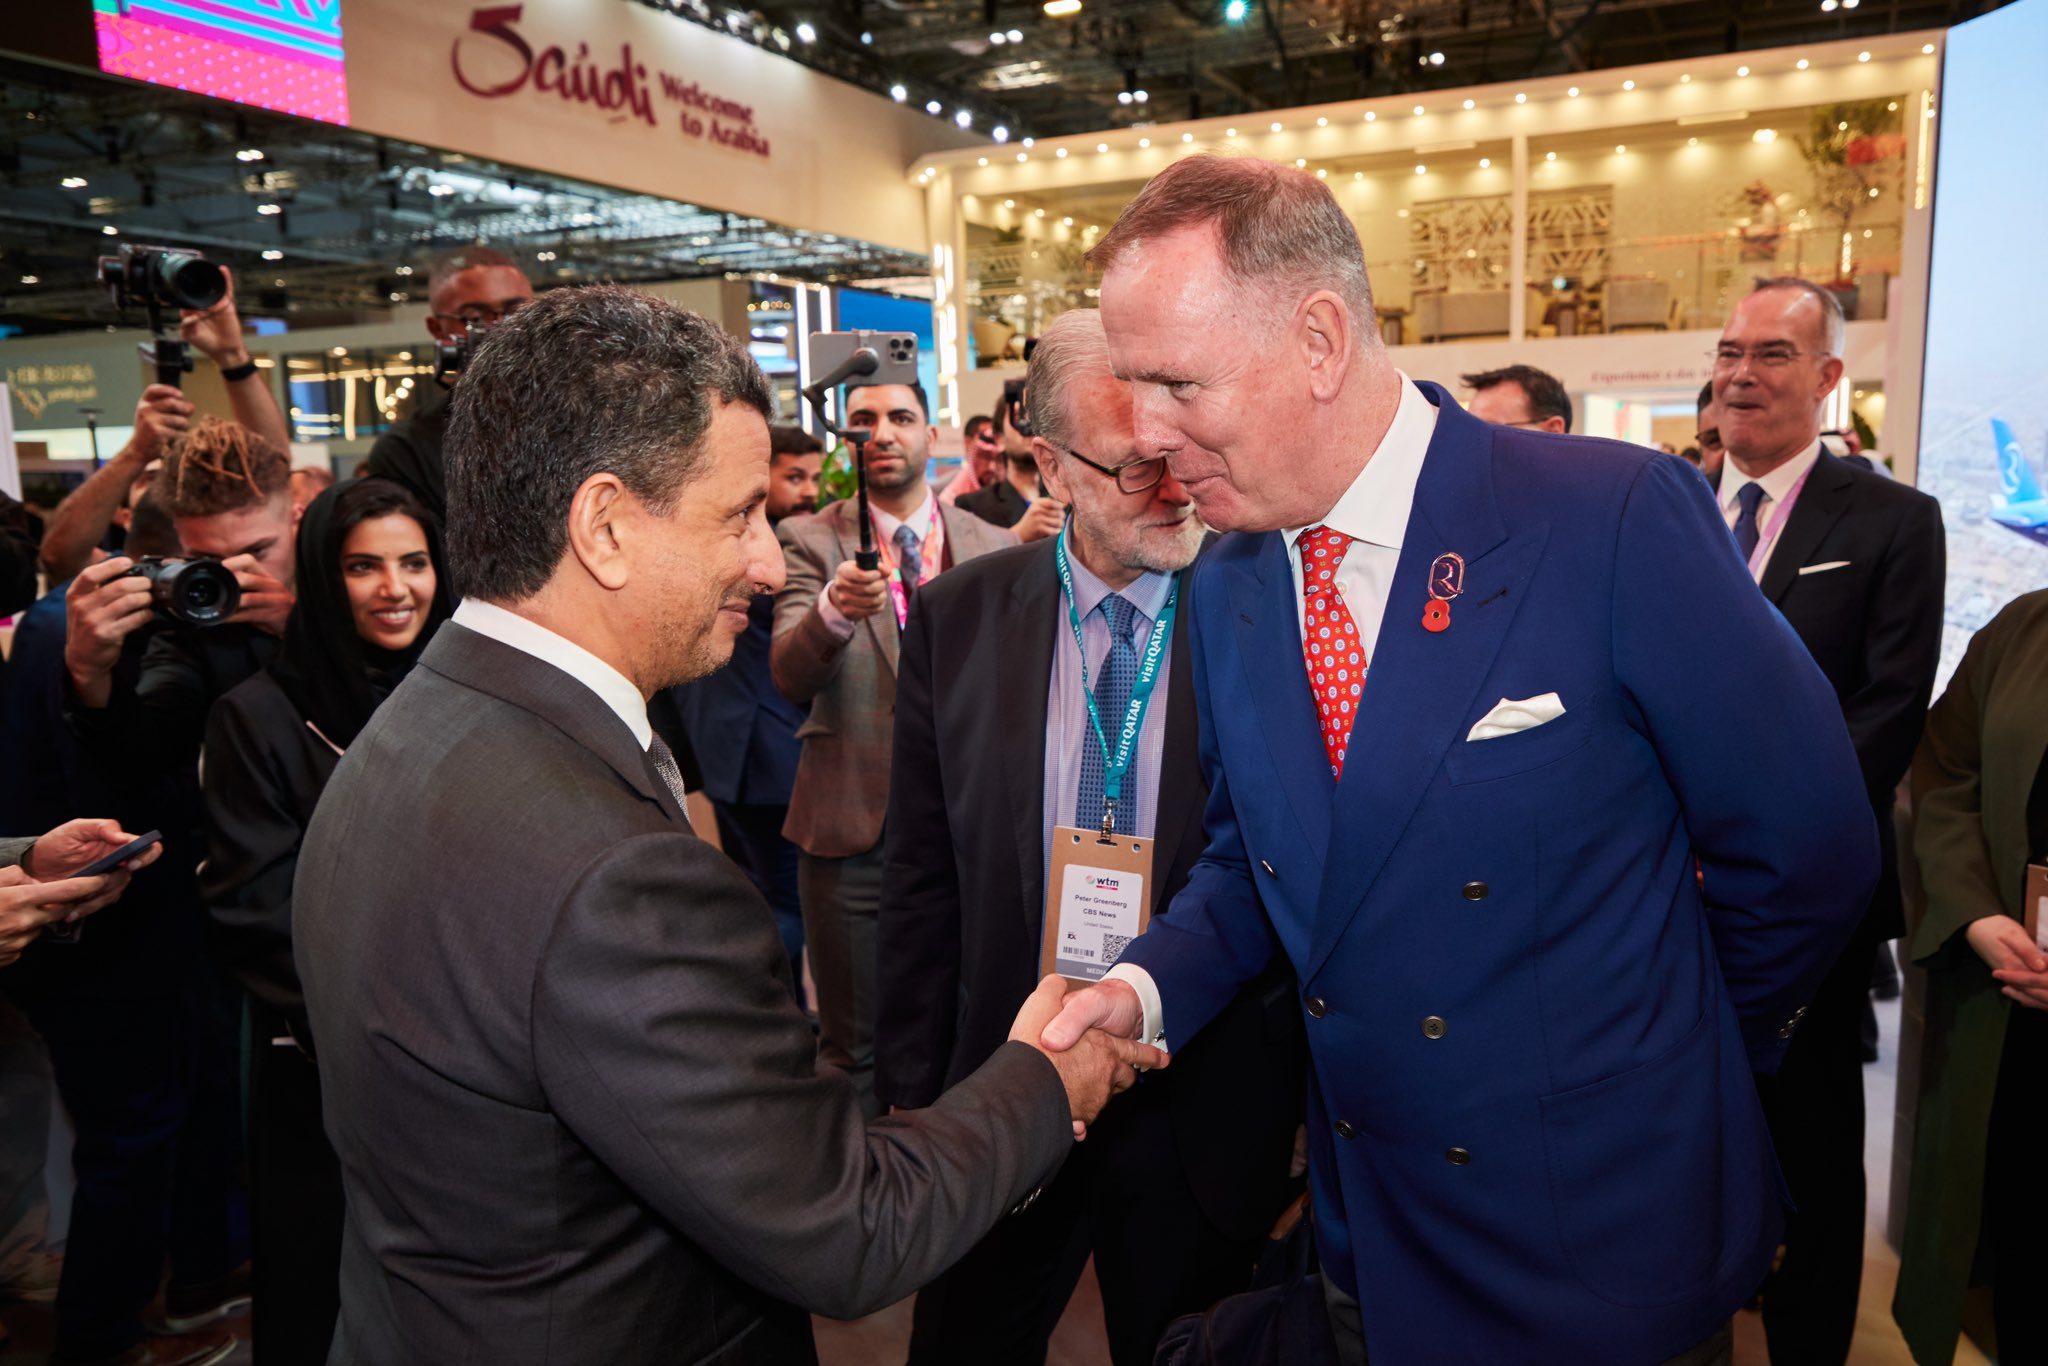 Saudi tourism minister Ahmed Al Khatib and Riyadh Air CEO Tony Douglas at the airline's pavilion at the WTM London exhibition